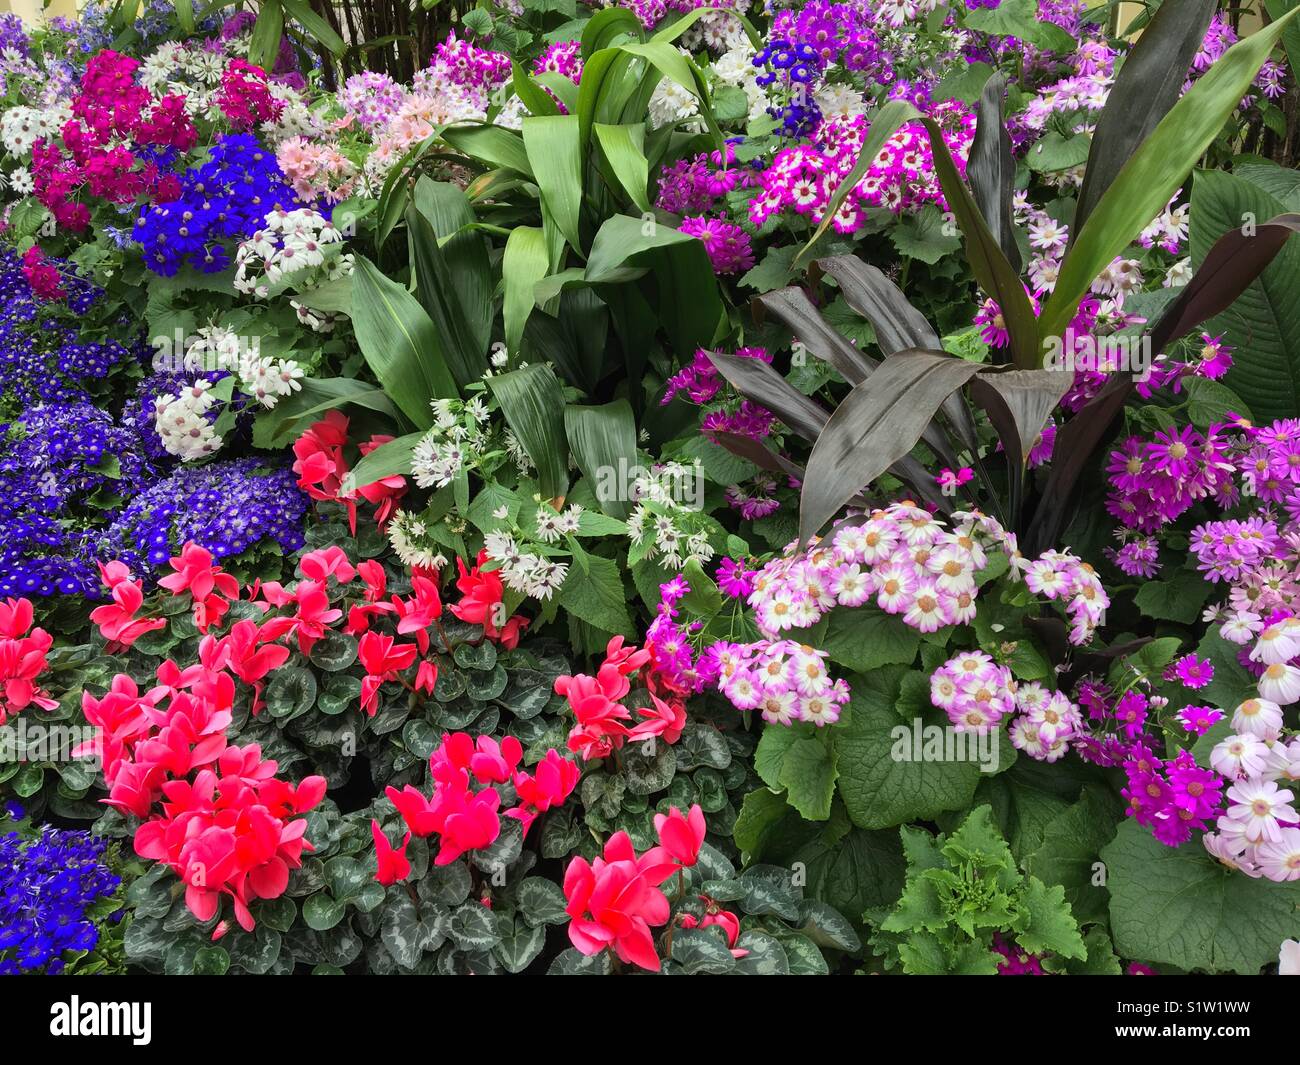 Garden bed of flowering cinerarias and cyclamens plants Stock Photo